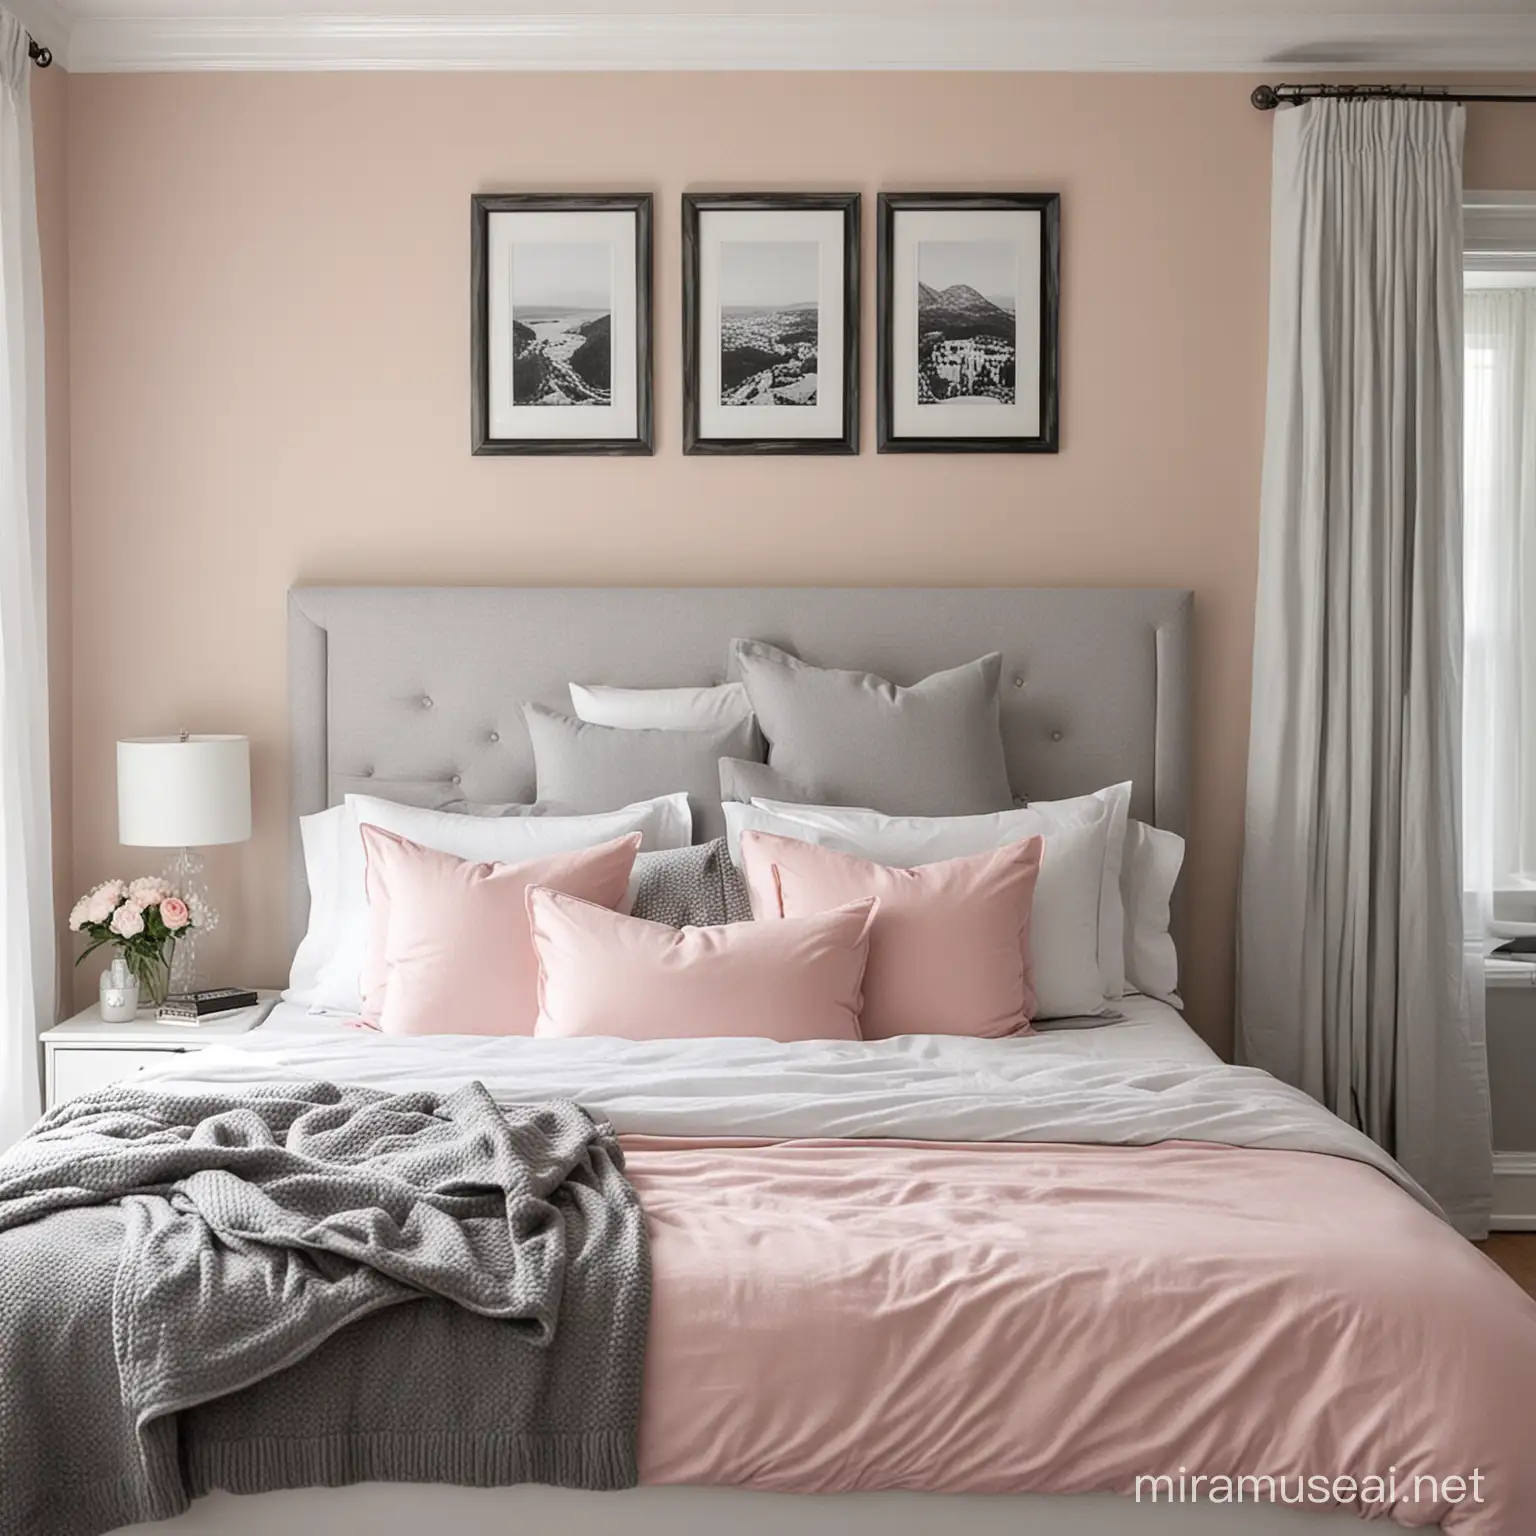 A bedroom with three white walls and one light pink wall. On the bed there is a gray duvet cover with gray pillows and a white sheet and a gray blanket at the edge of the bed. And a white headboard. Above the bed are four black and white photos hung on the wall. The curtains are gray. There is a white bedside table with three drawers and on the top is a small black box and a picture frame.